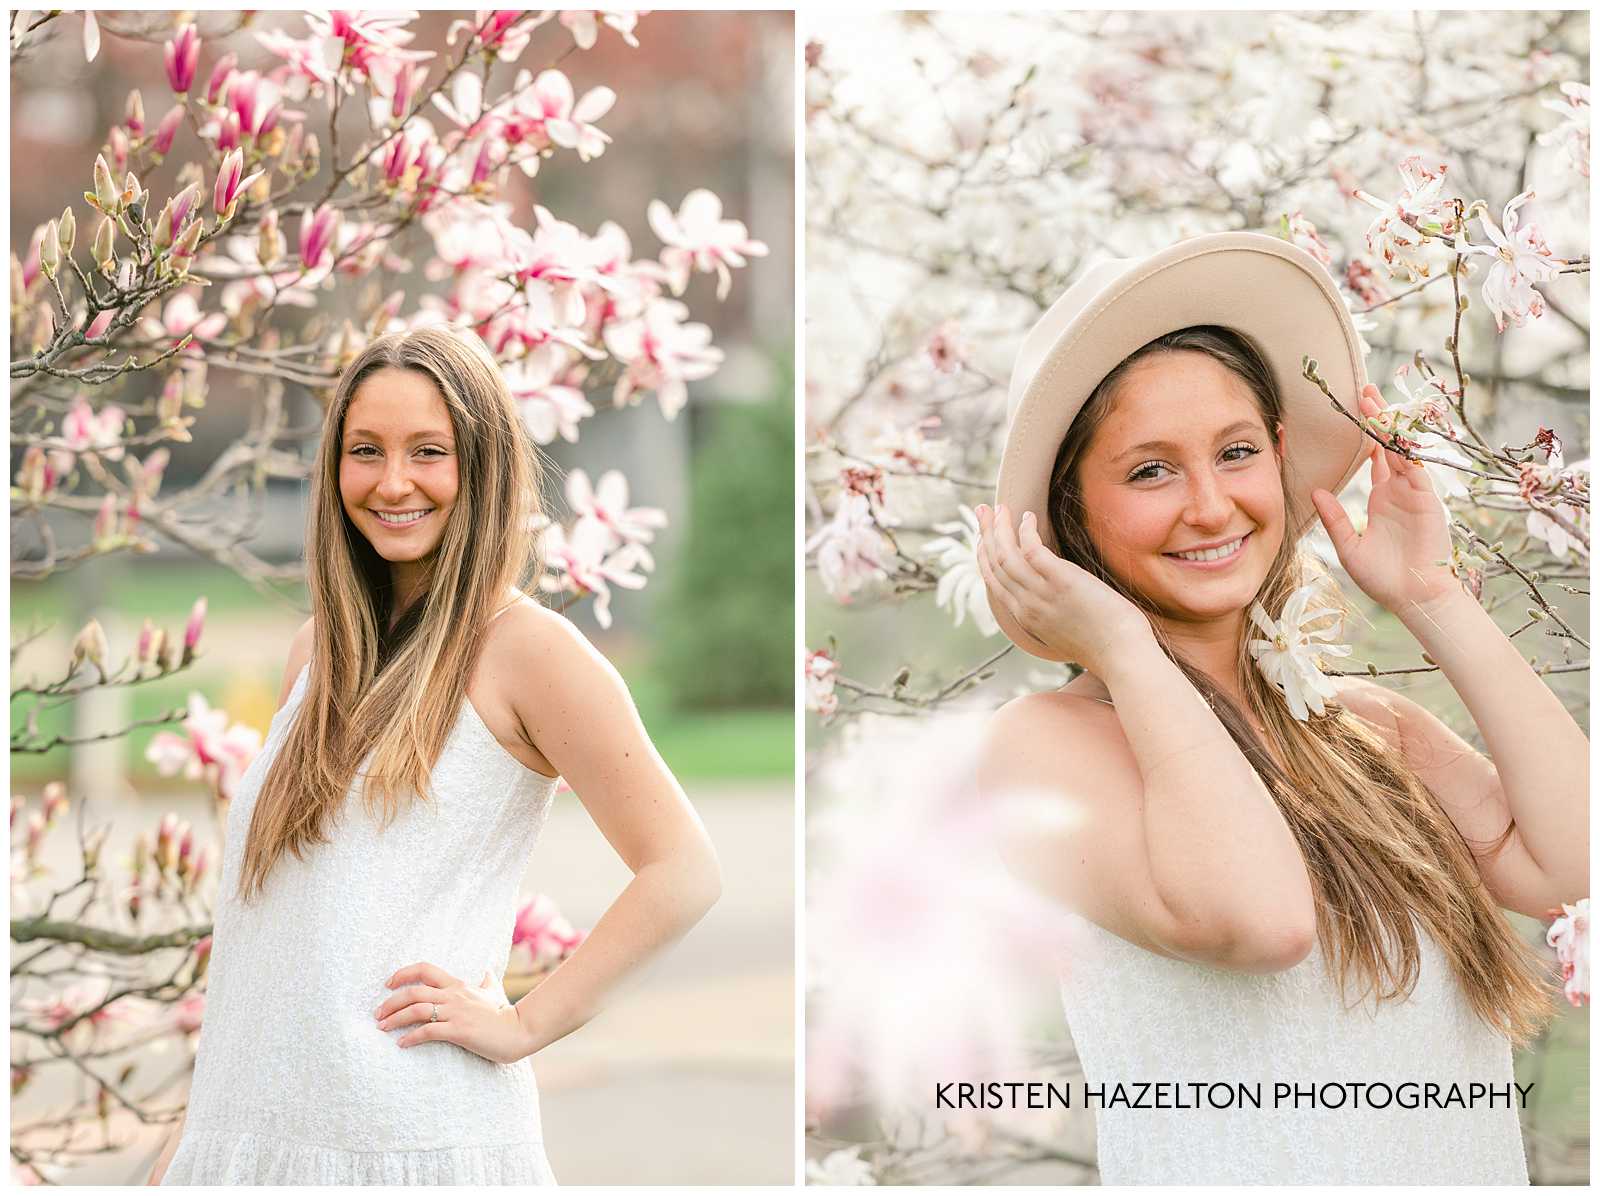 High school senior photos with pink and white magnolias.